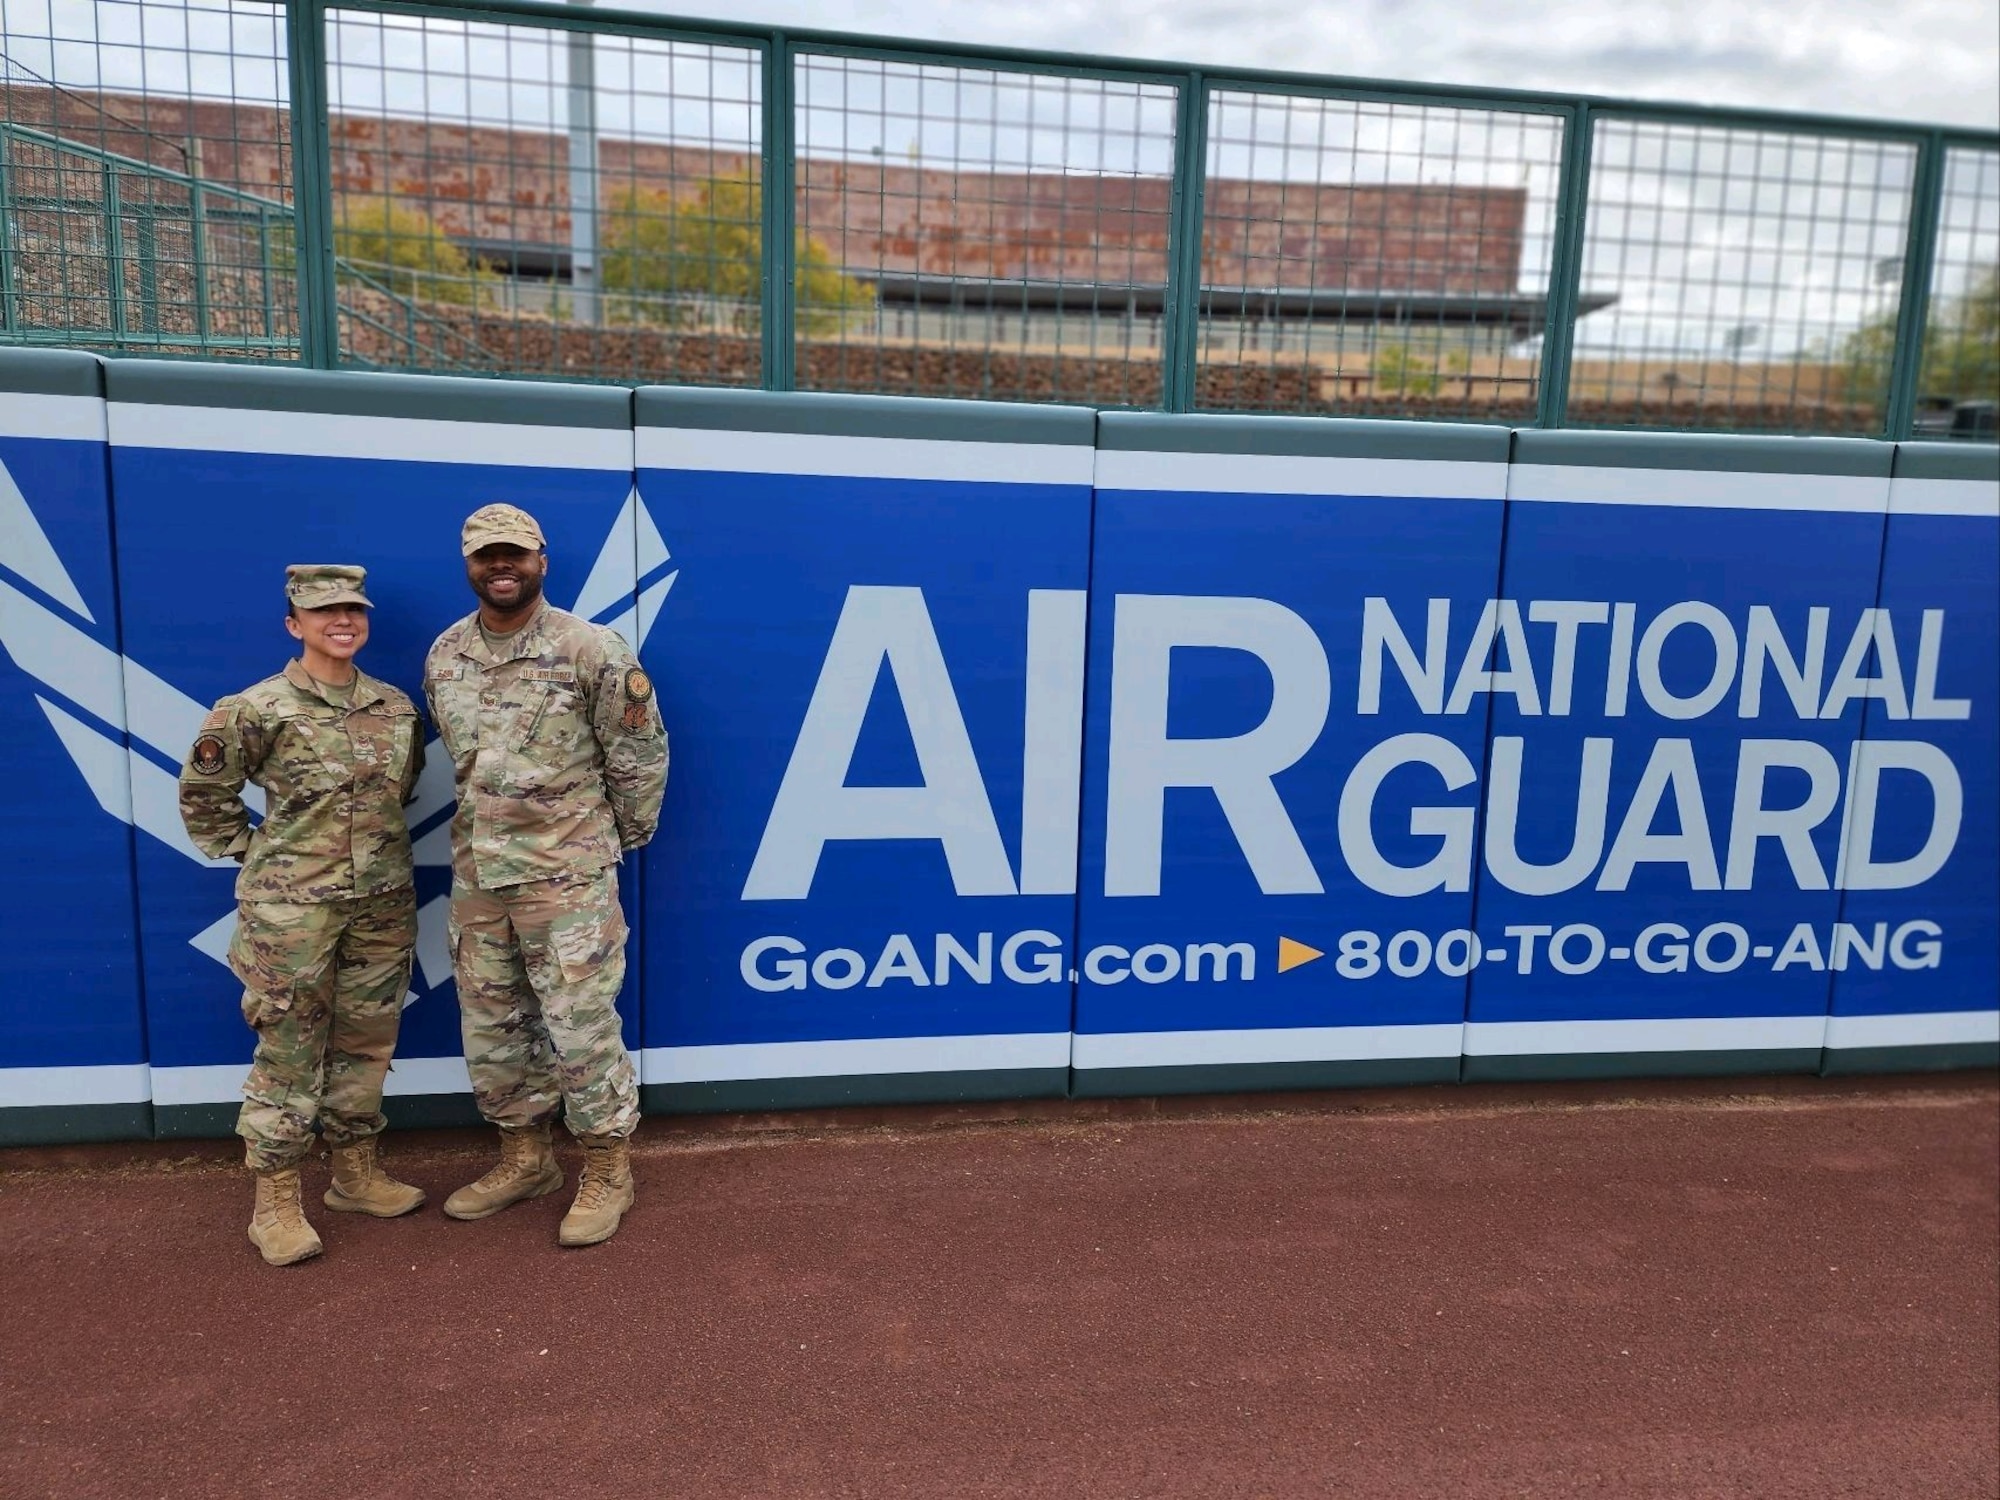 Tech. Sgts. Anna Solis and Glen Eason, production recruiters with the Arizona Air National Guard, pose for a photo in front of the Air National Guard outfield banner at Camelback Ranch–Glendale baseball complex in Phoenix, March 1, 2023.